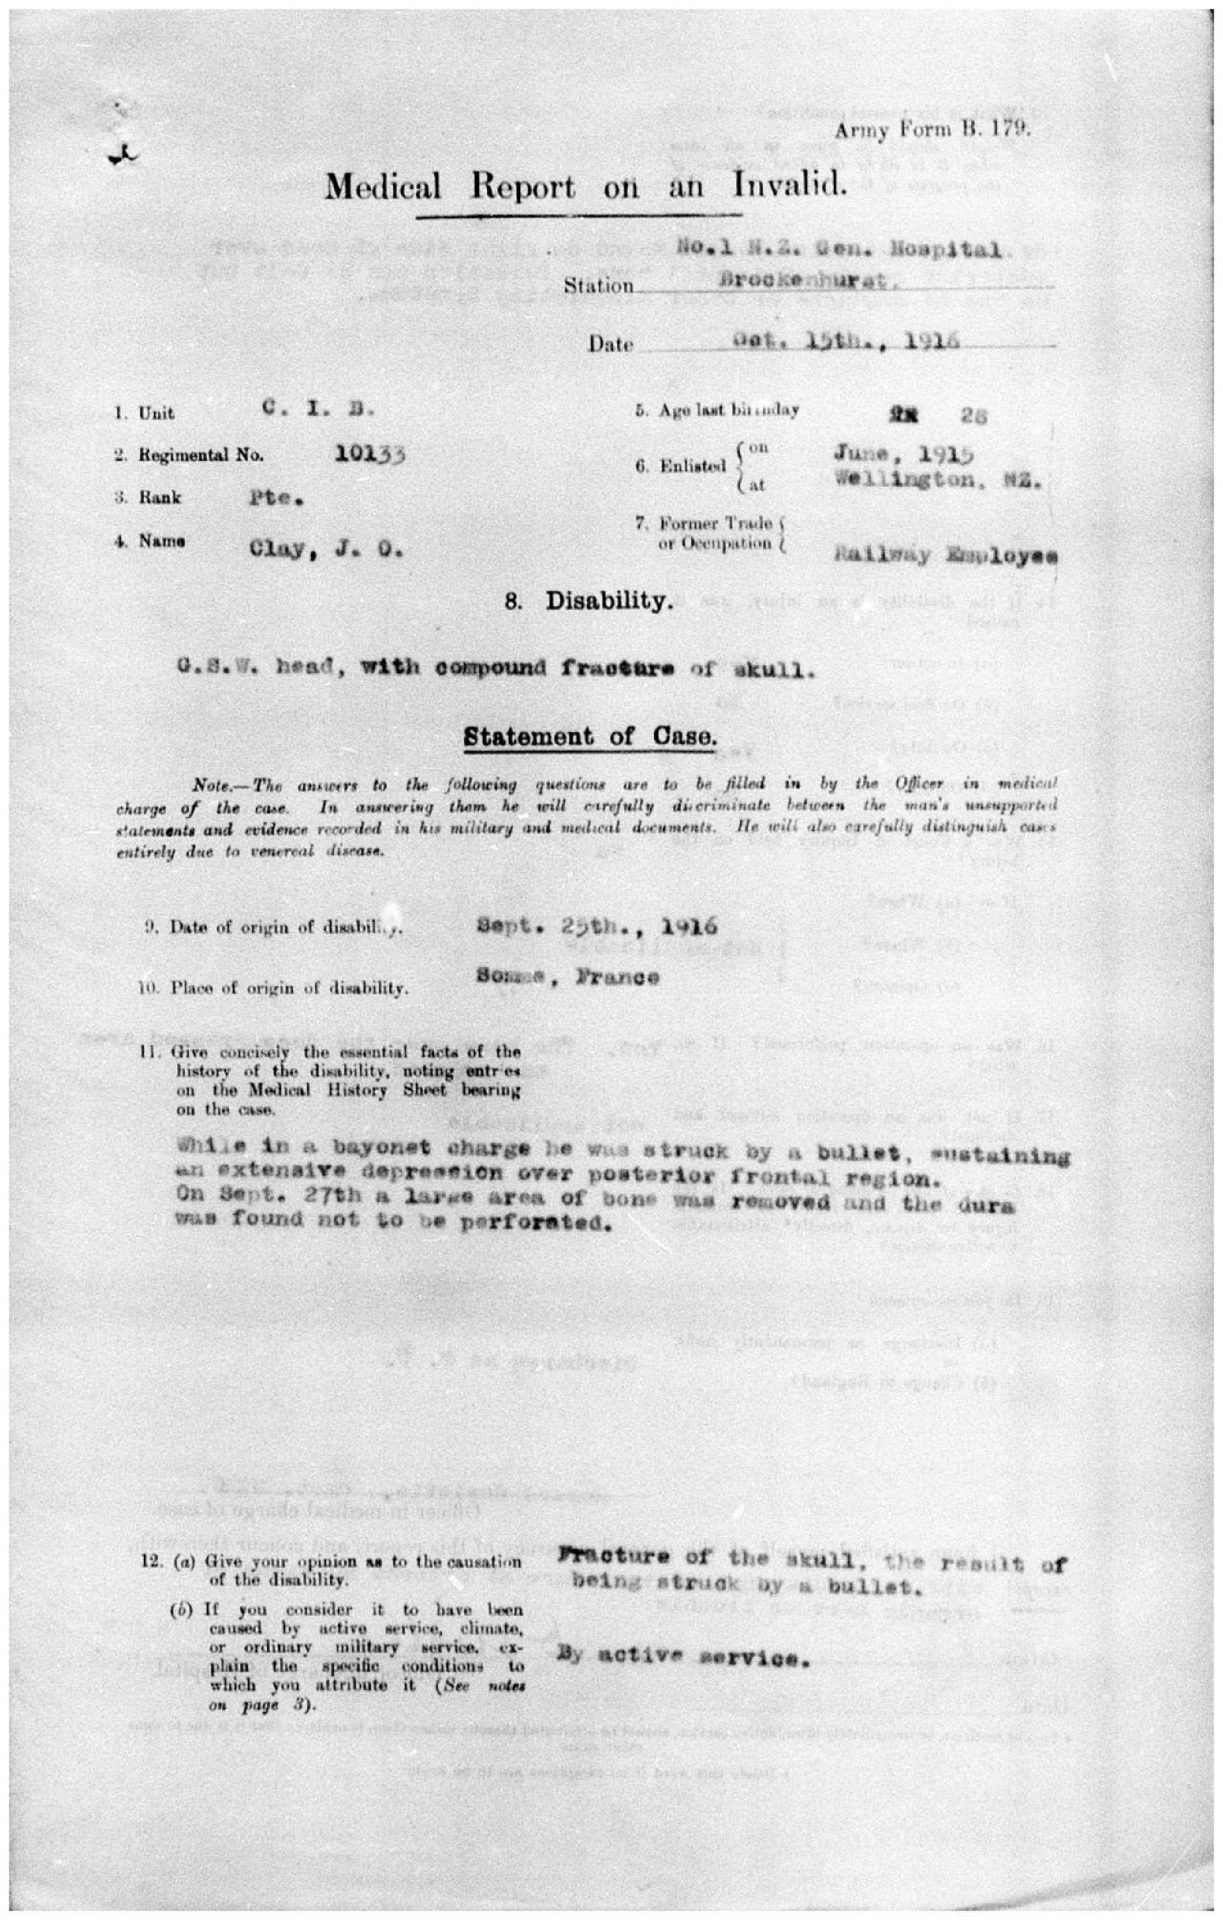 Medical record for John Owen Clay. New Zealand Defence Force Personnel Records. Archives New Zealand.